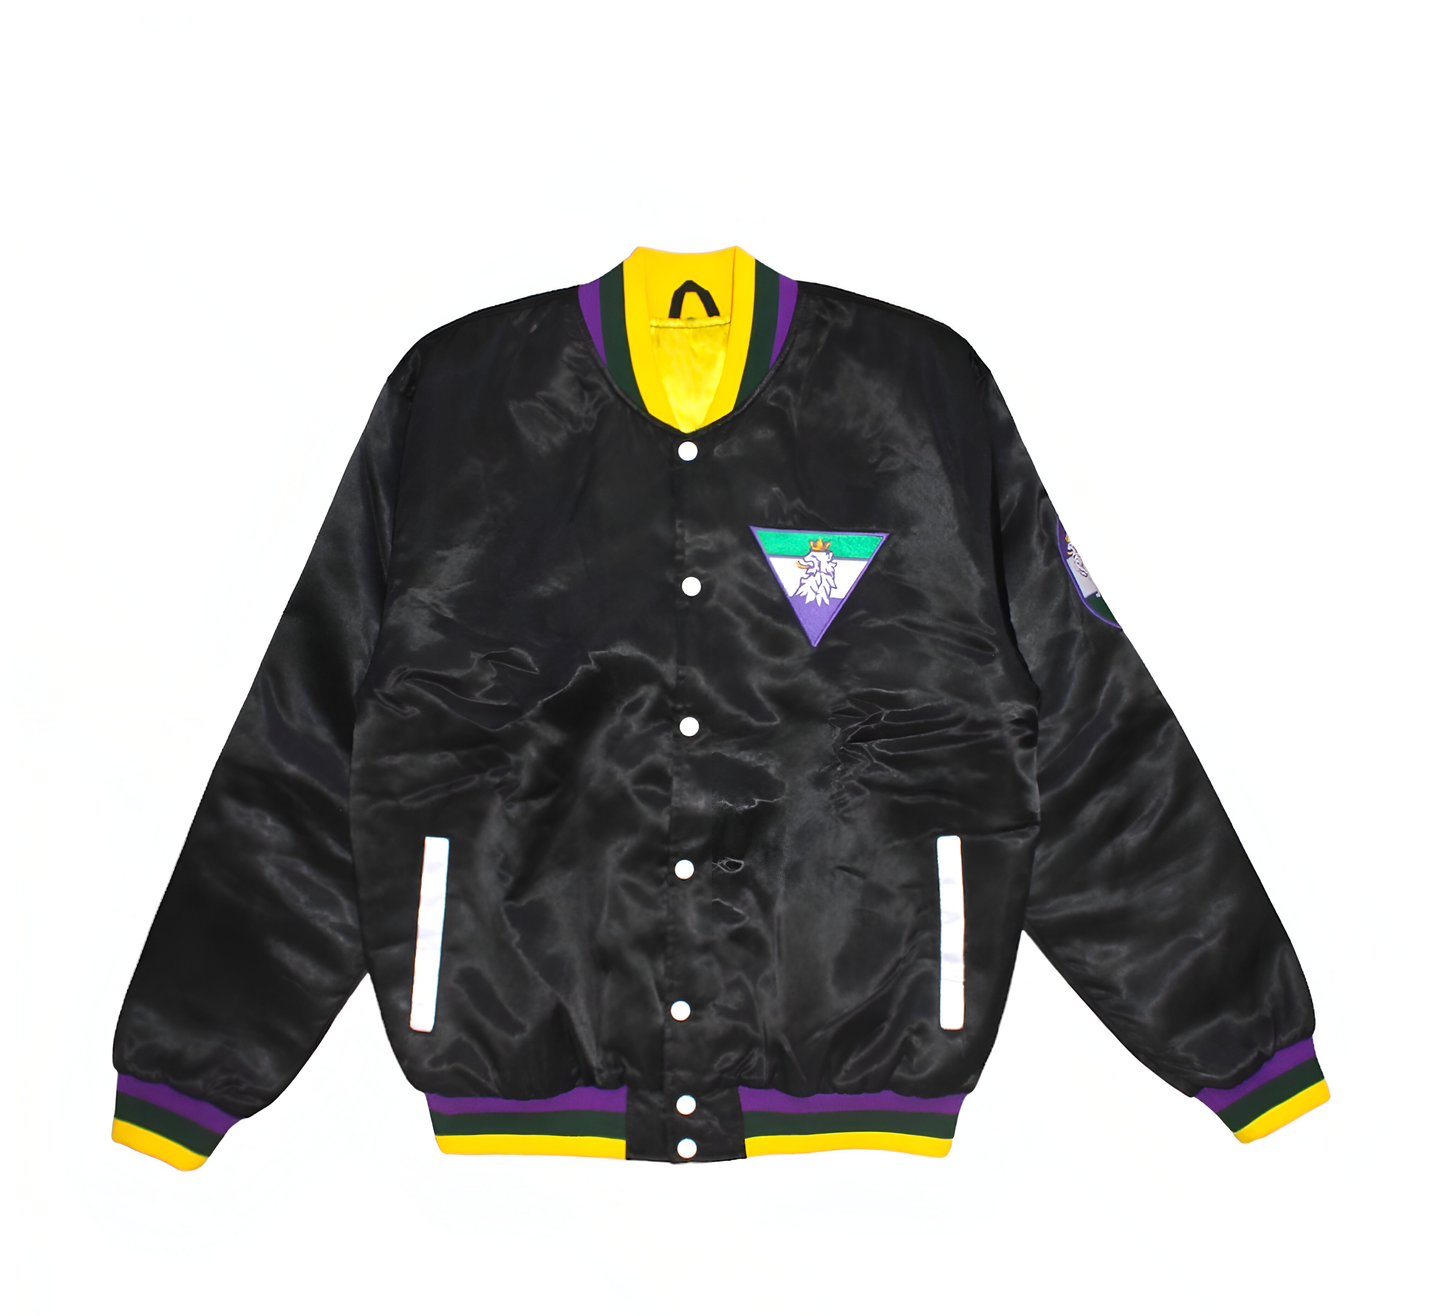 Royalty10 Zulu Mardi Gras 23 Satin Bomber Jacket: A vibrant and stylish jacket with intricate embroidery, perfect for celebrating Mardi Gras in Louisiana.